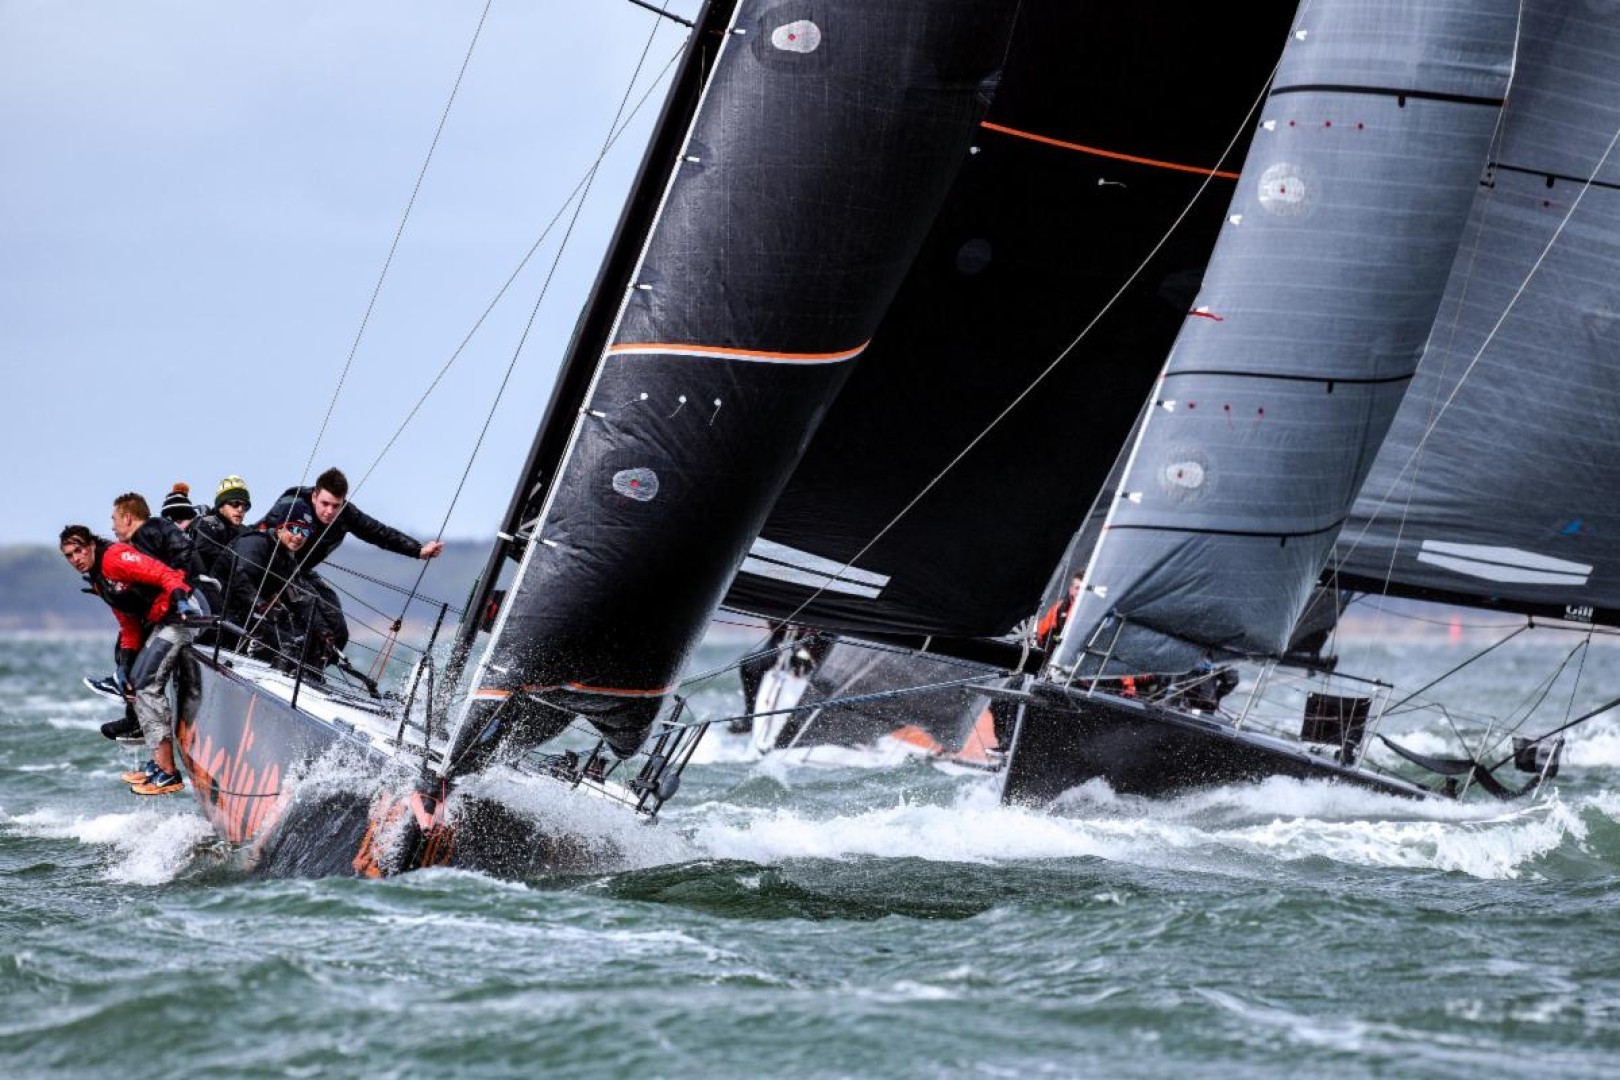 Nine boats will be competing in the HP30 class in the RORC Vice Admiral's Cup between 20-22nd May, including Jamie Rankin's Farr 280 Pandemonium © James Tomlinson